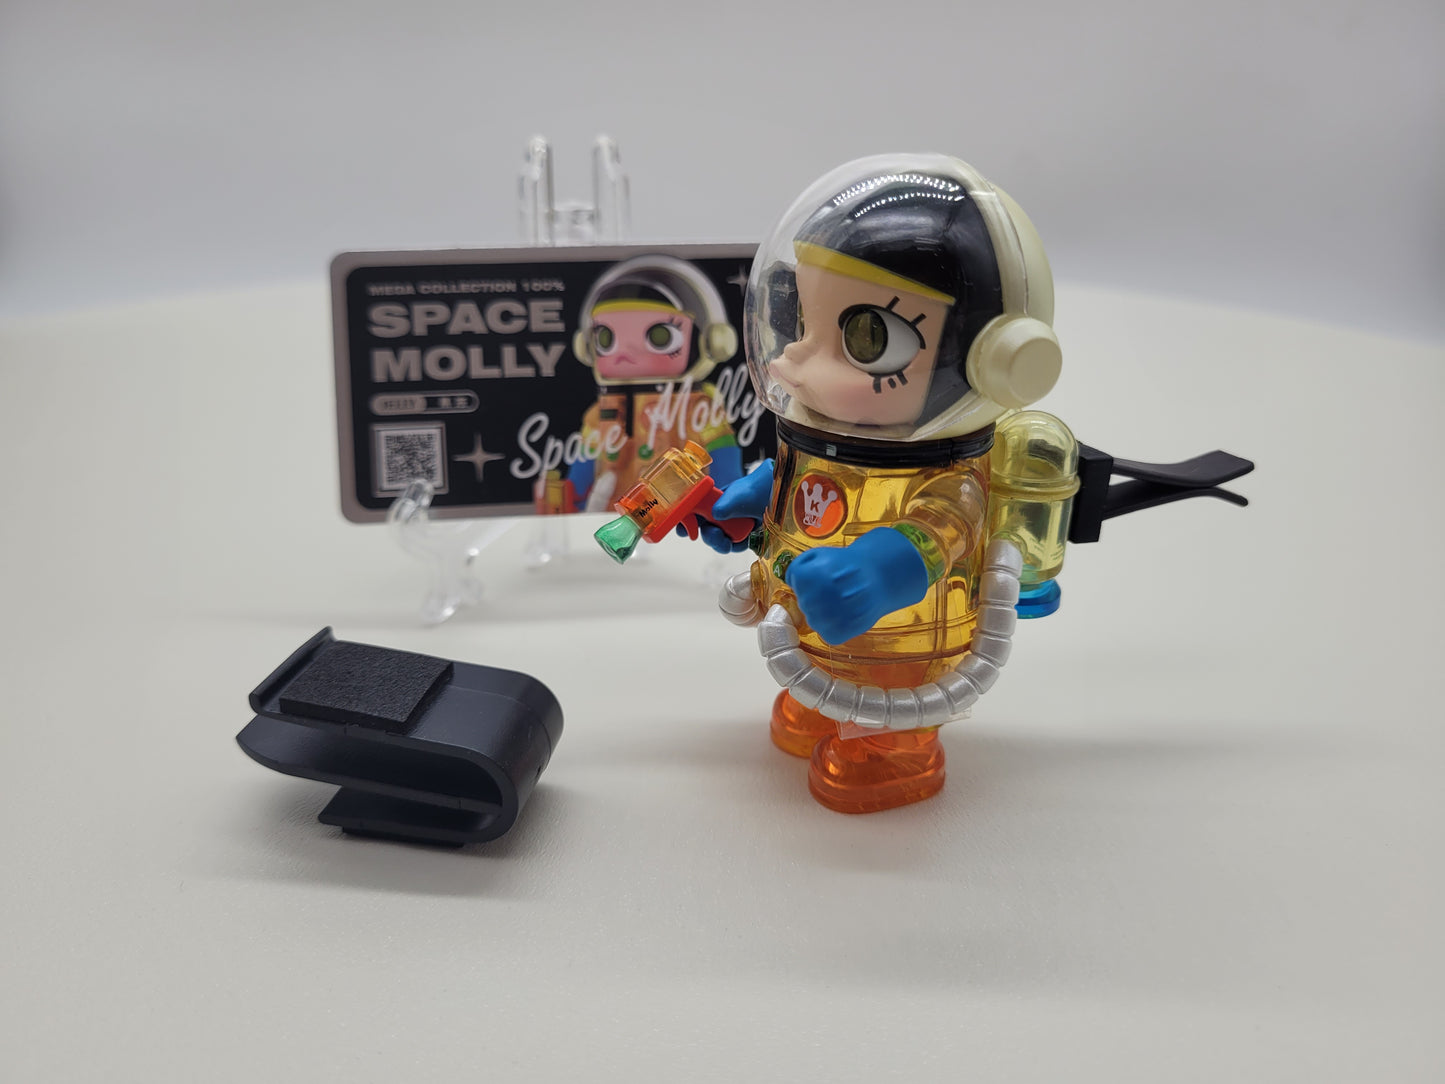 PopMart 100% Space Molly with Air Vent Clips + Tesla Bracket